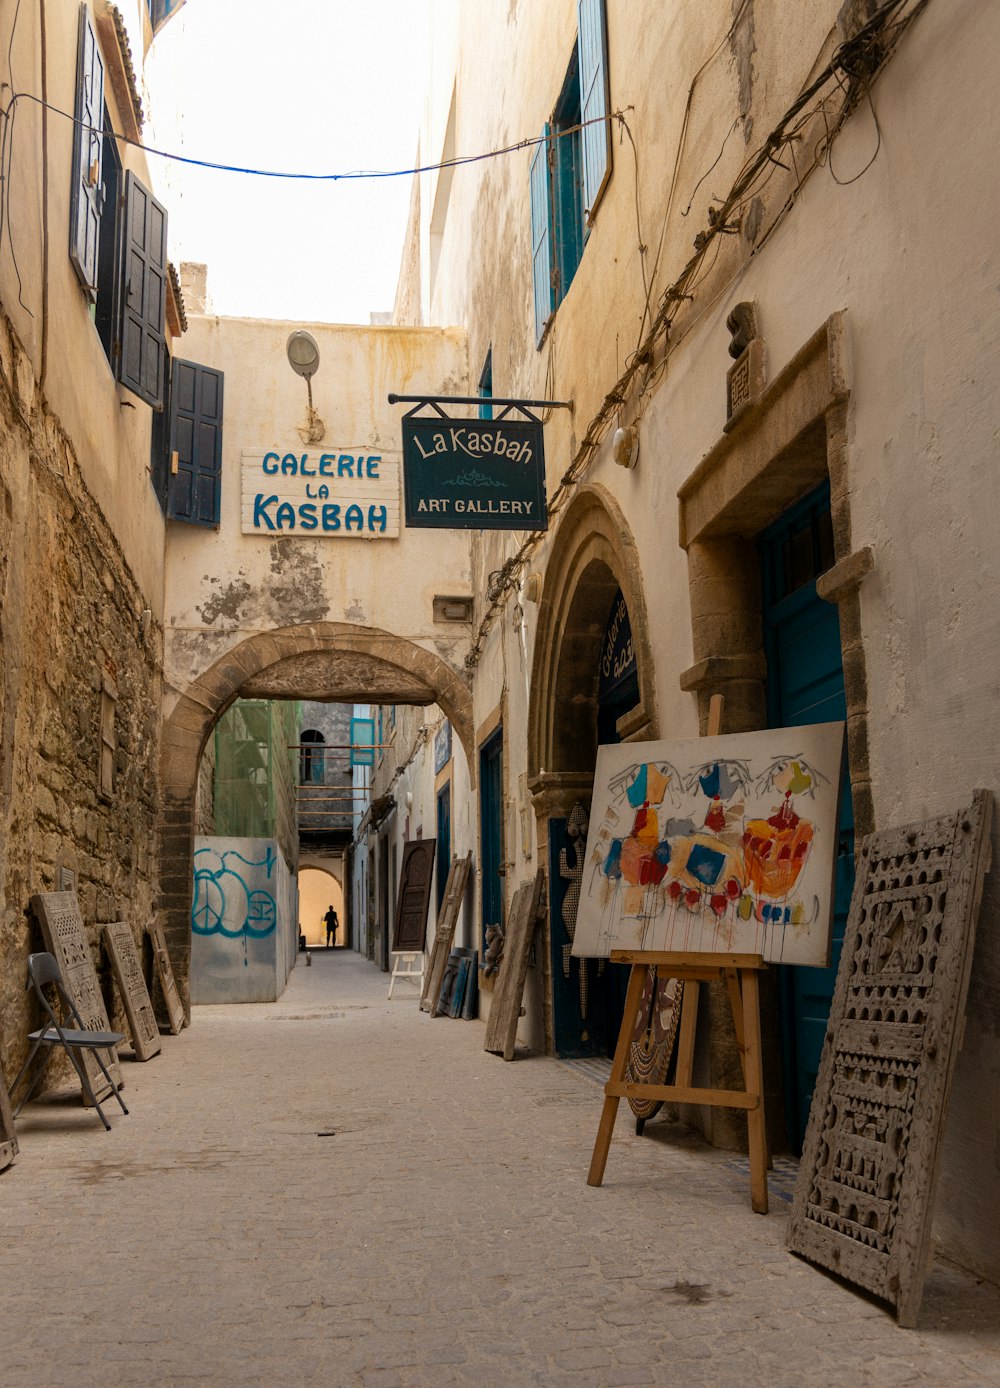 a narrow alleyway with a sign and easel